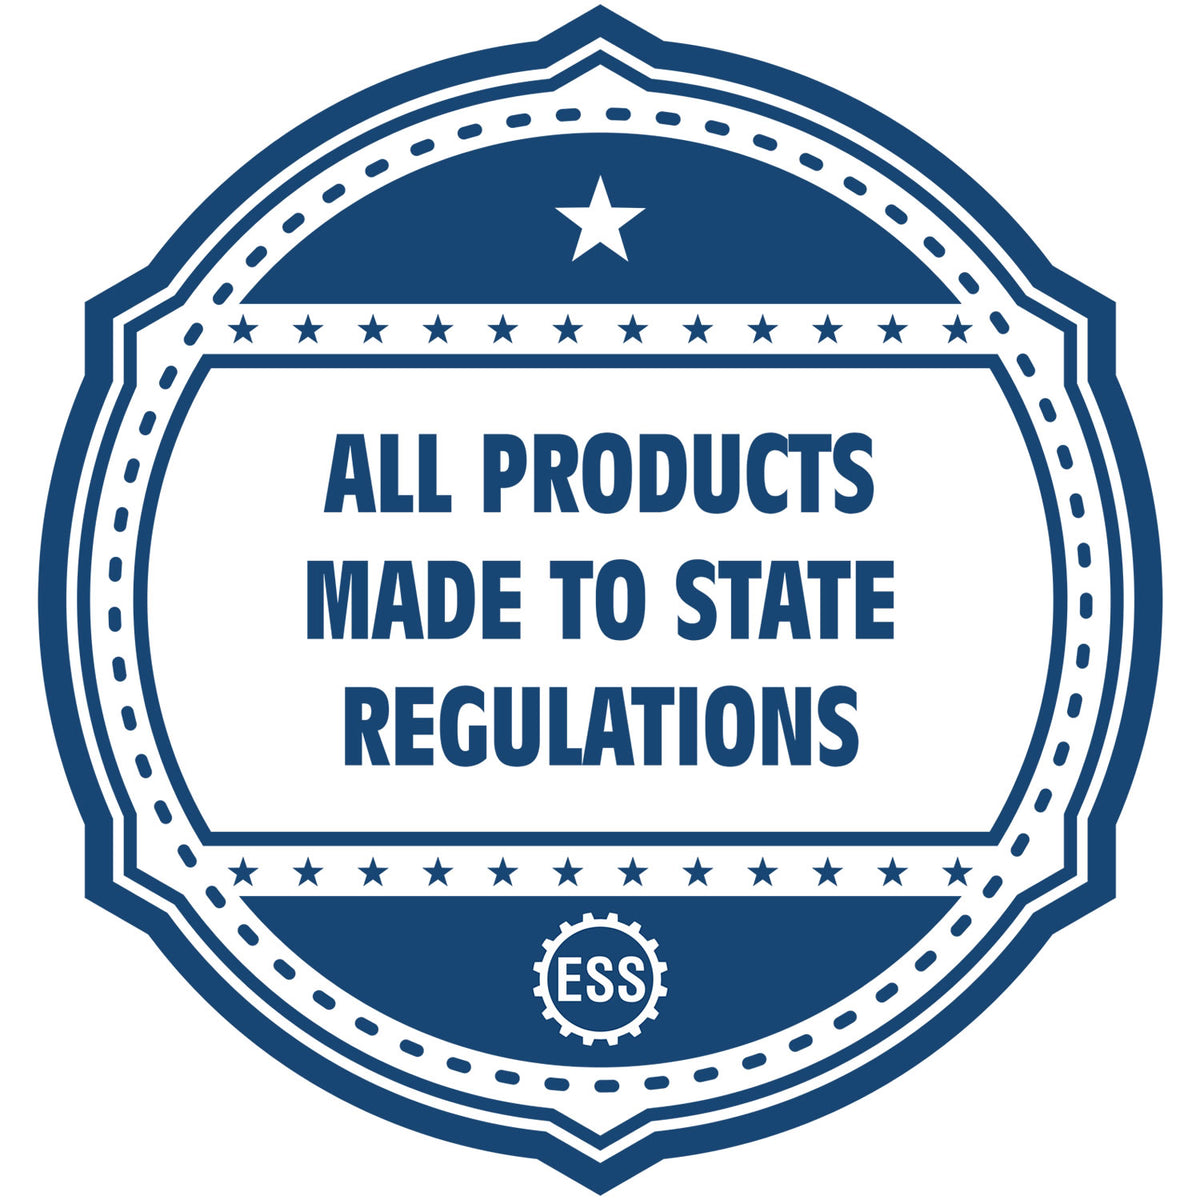 An icon or badge element for the Self-Inking Illinois PE Stamp showing that this product is made in compliance with state regulations.